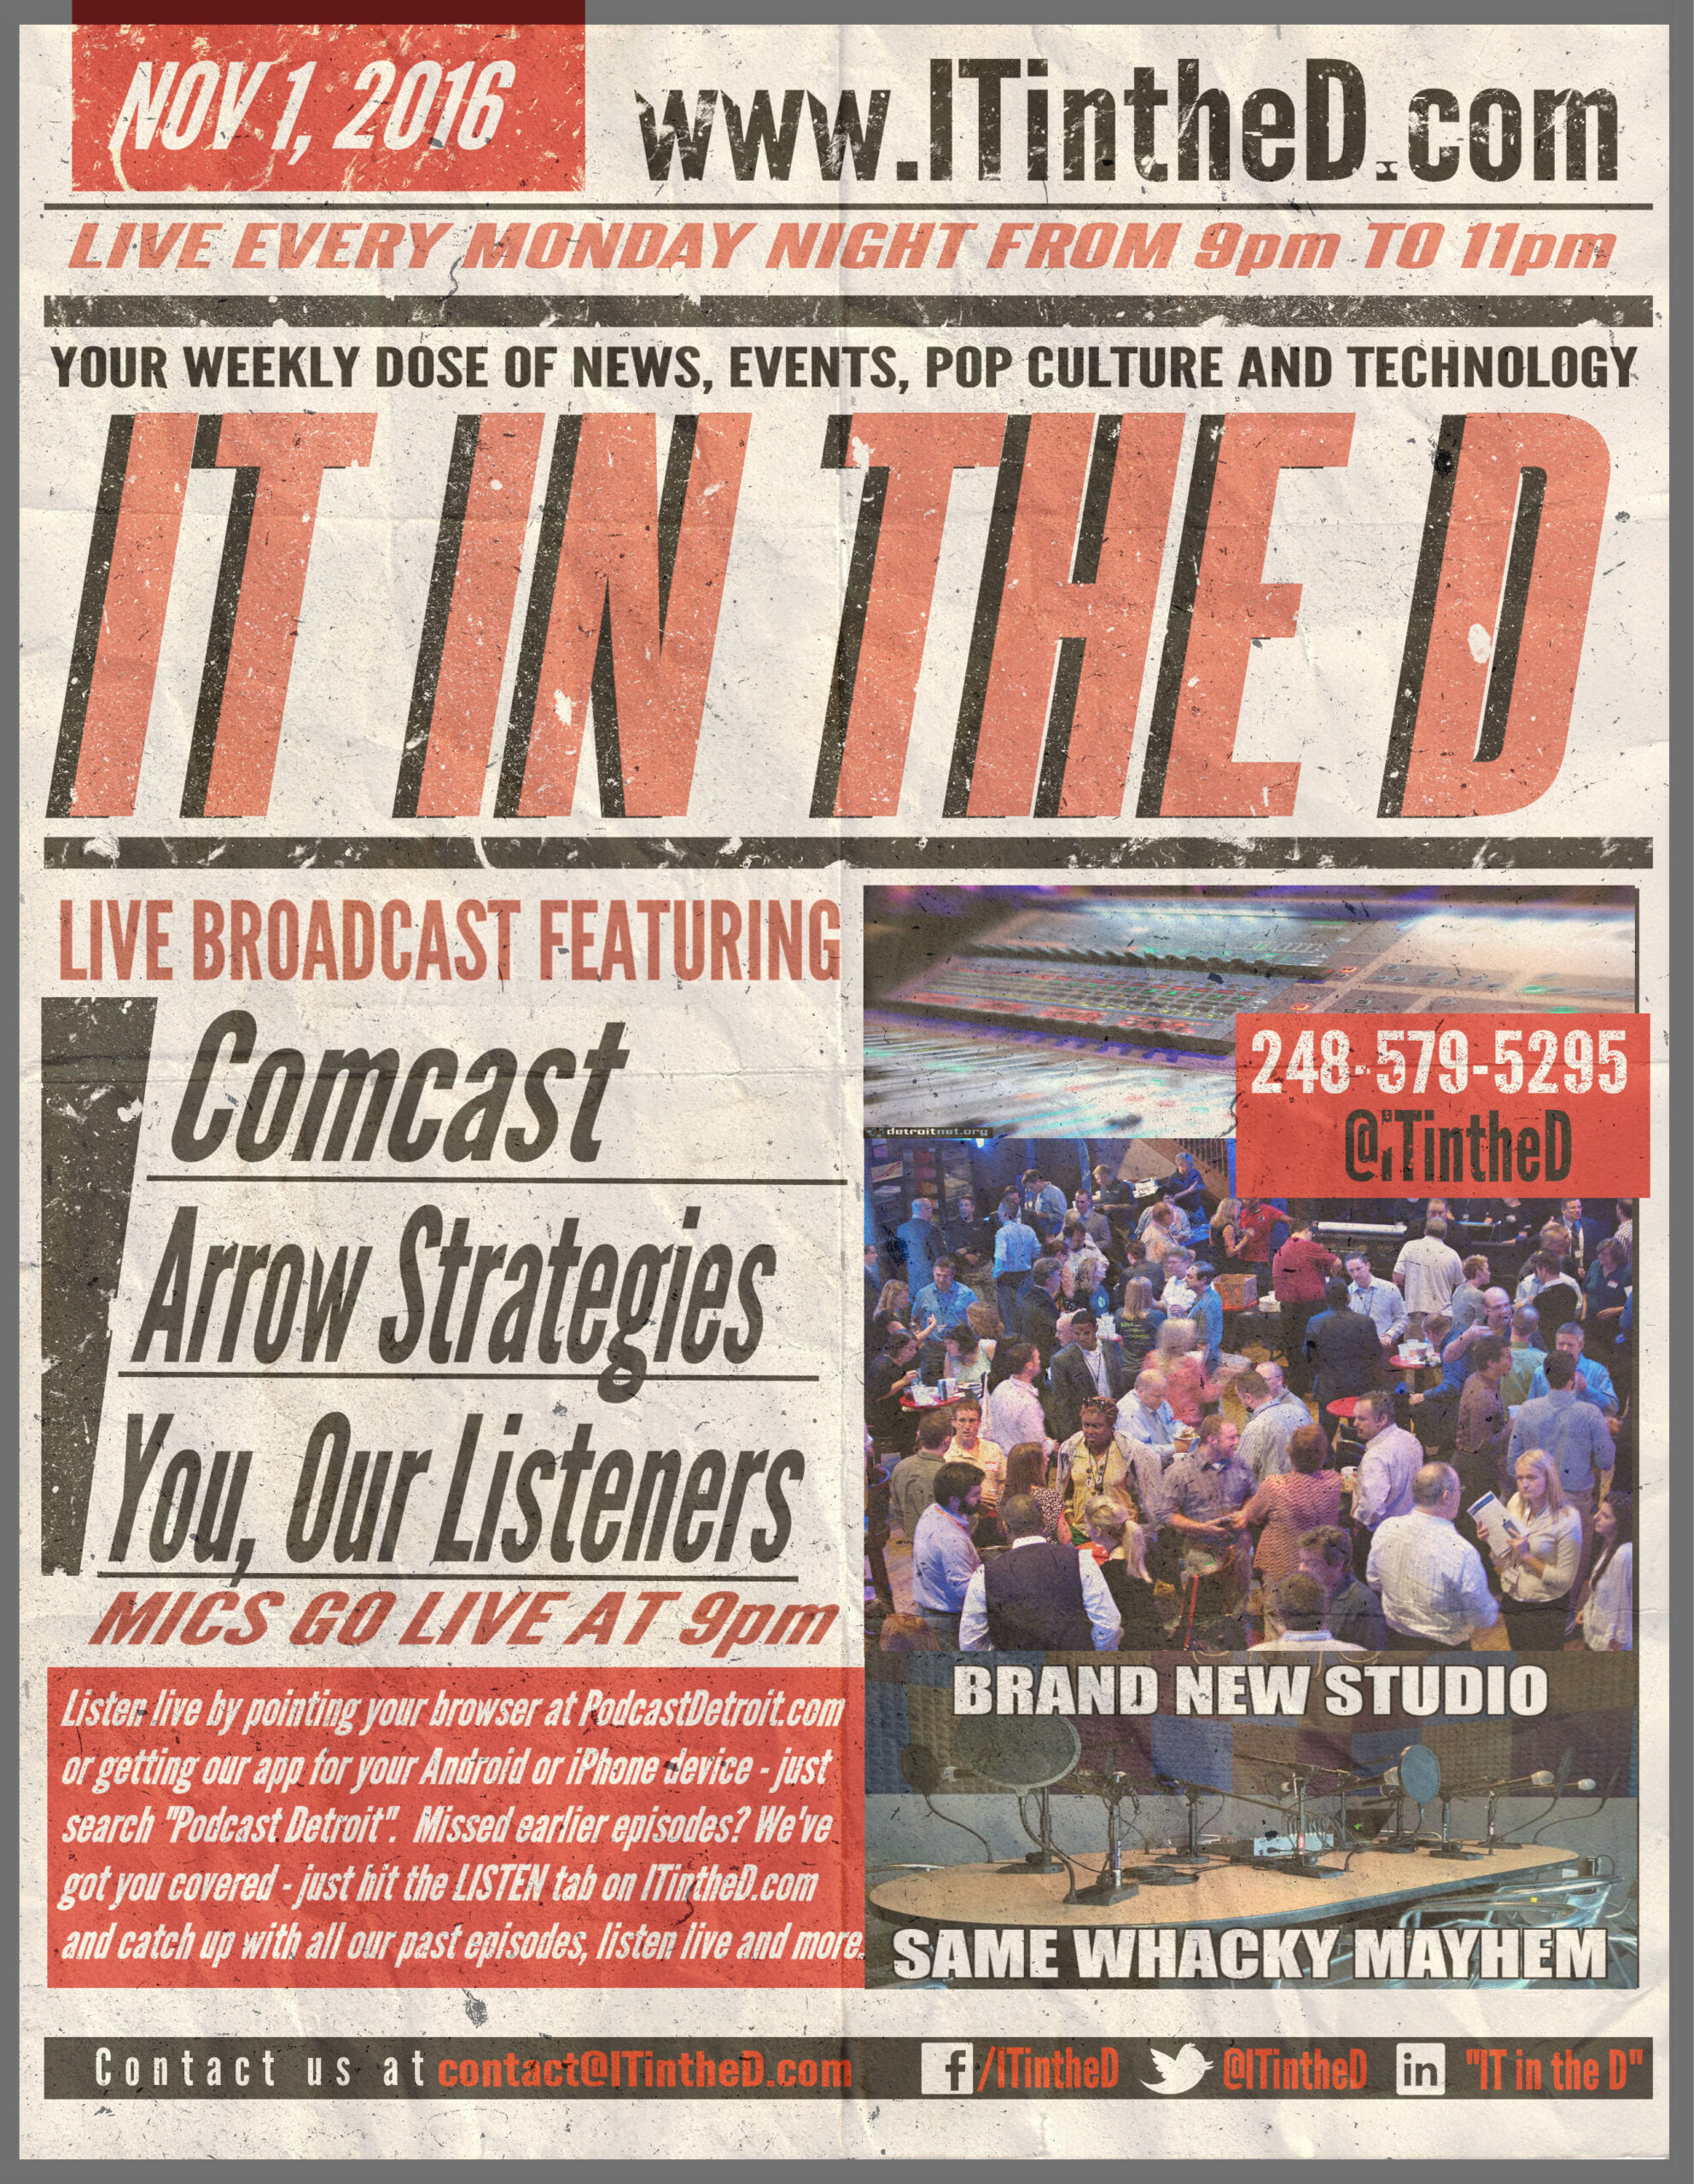 Comcast, Arrow Strategies Live In Studio Tonight, Podcast Detroit Expansion, Event Updates and More for 11/1/2016